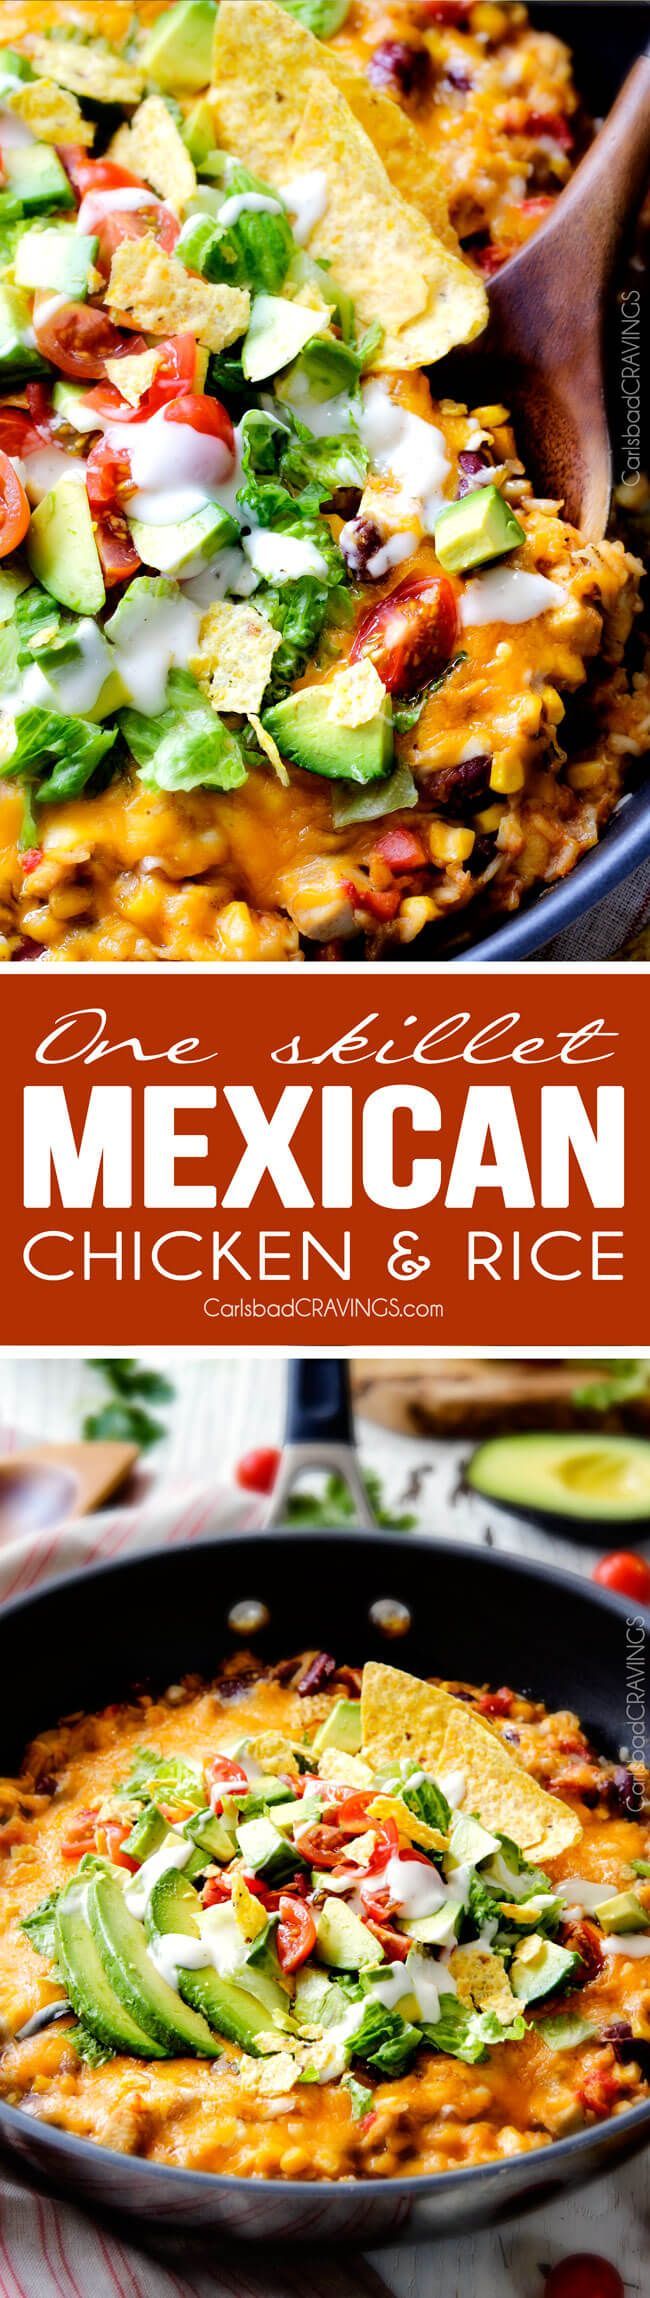 Creamy, Cheesy One Skillet Mexican Chicken and Rice on your table in 30 minutes! Quick, easy and packe